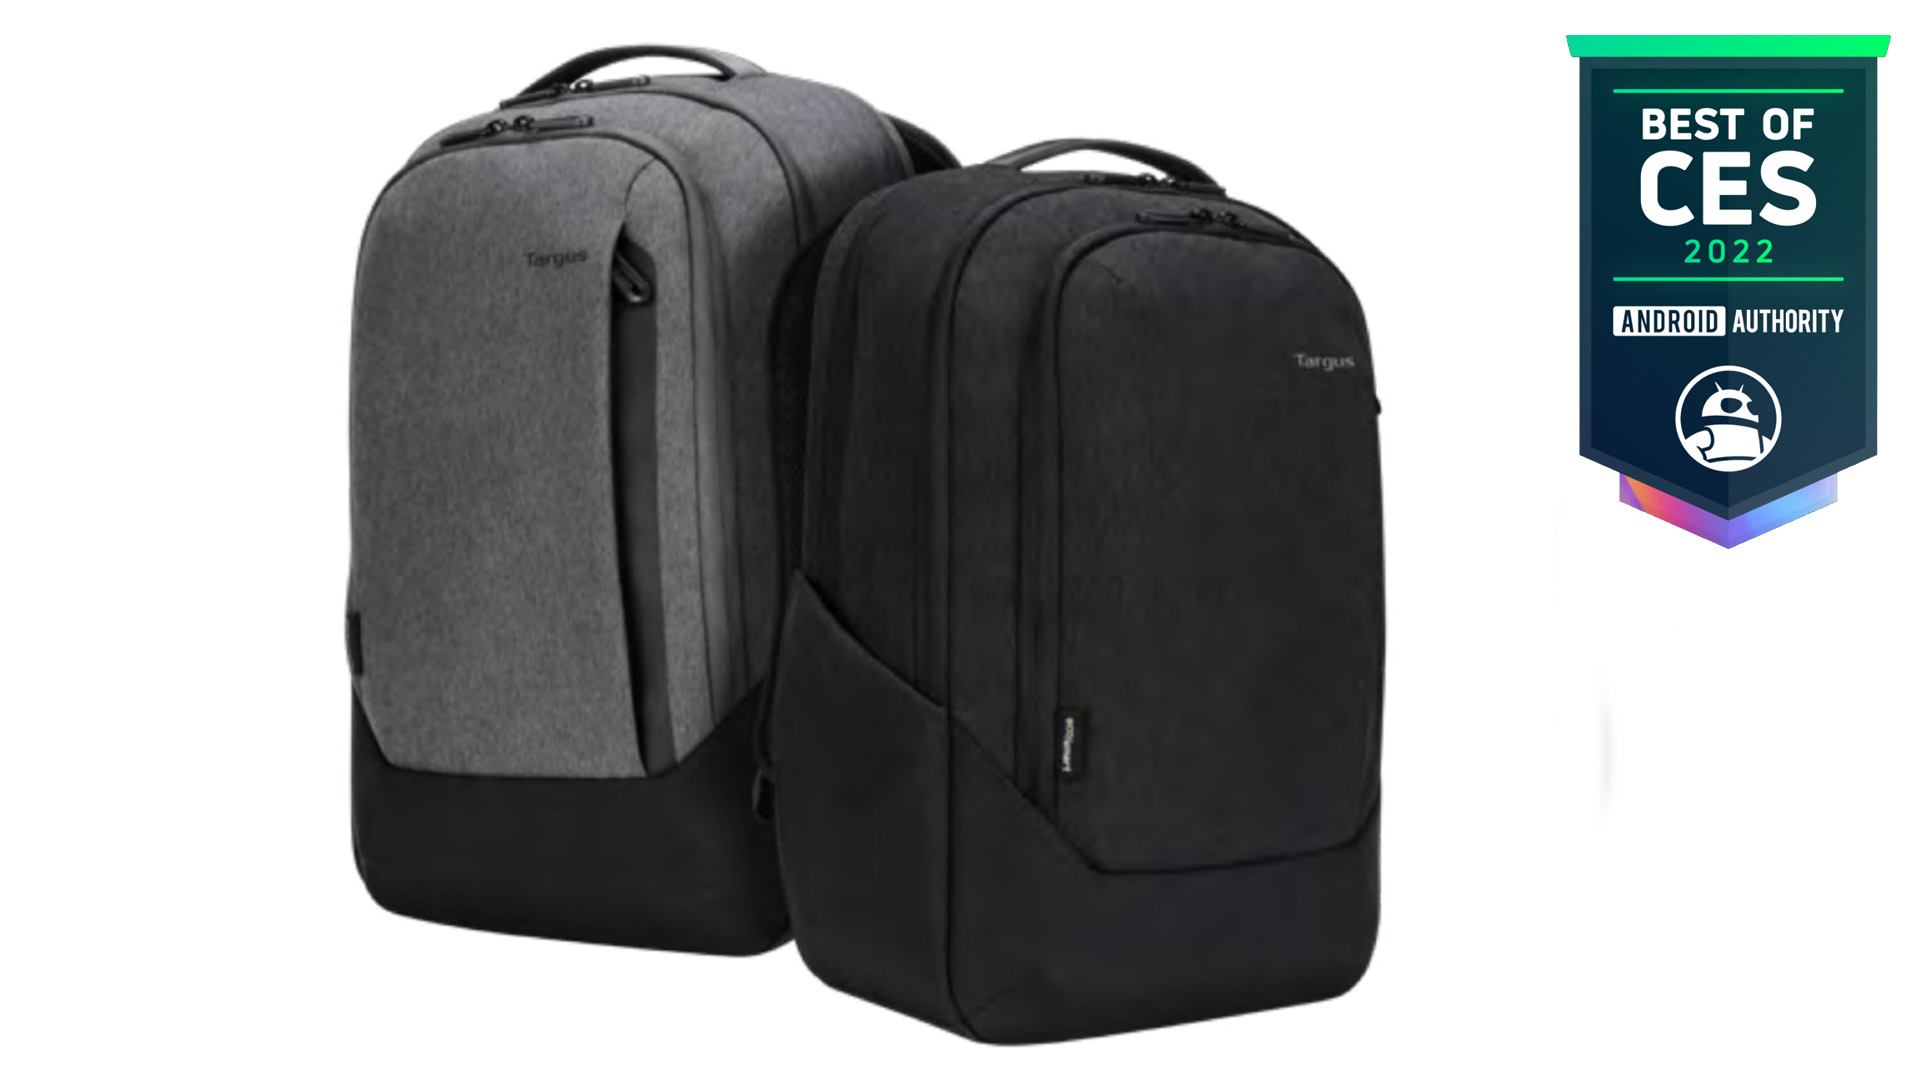 Targus Cypress Hero EcoSmart backpack Android Authority Best of CES 2022 Award winner